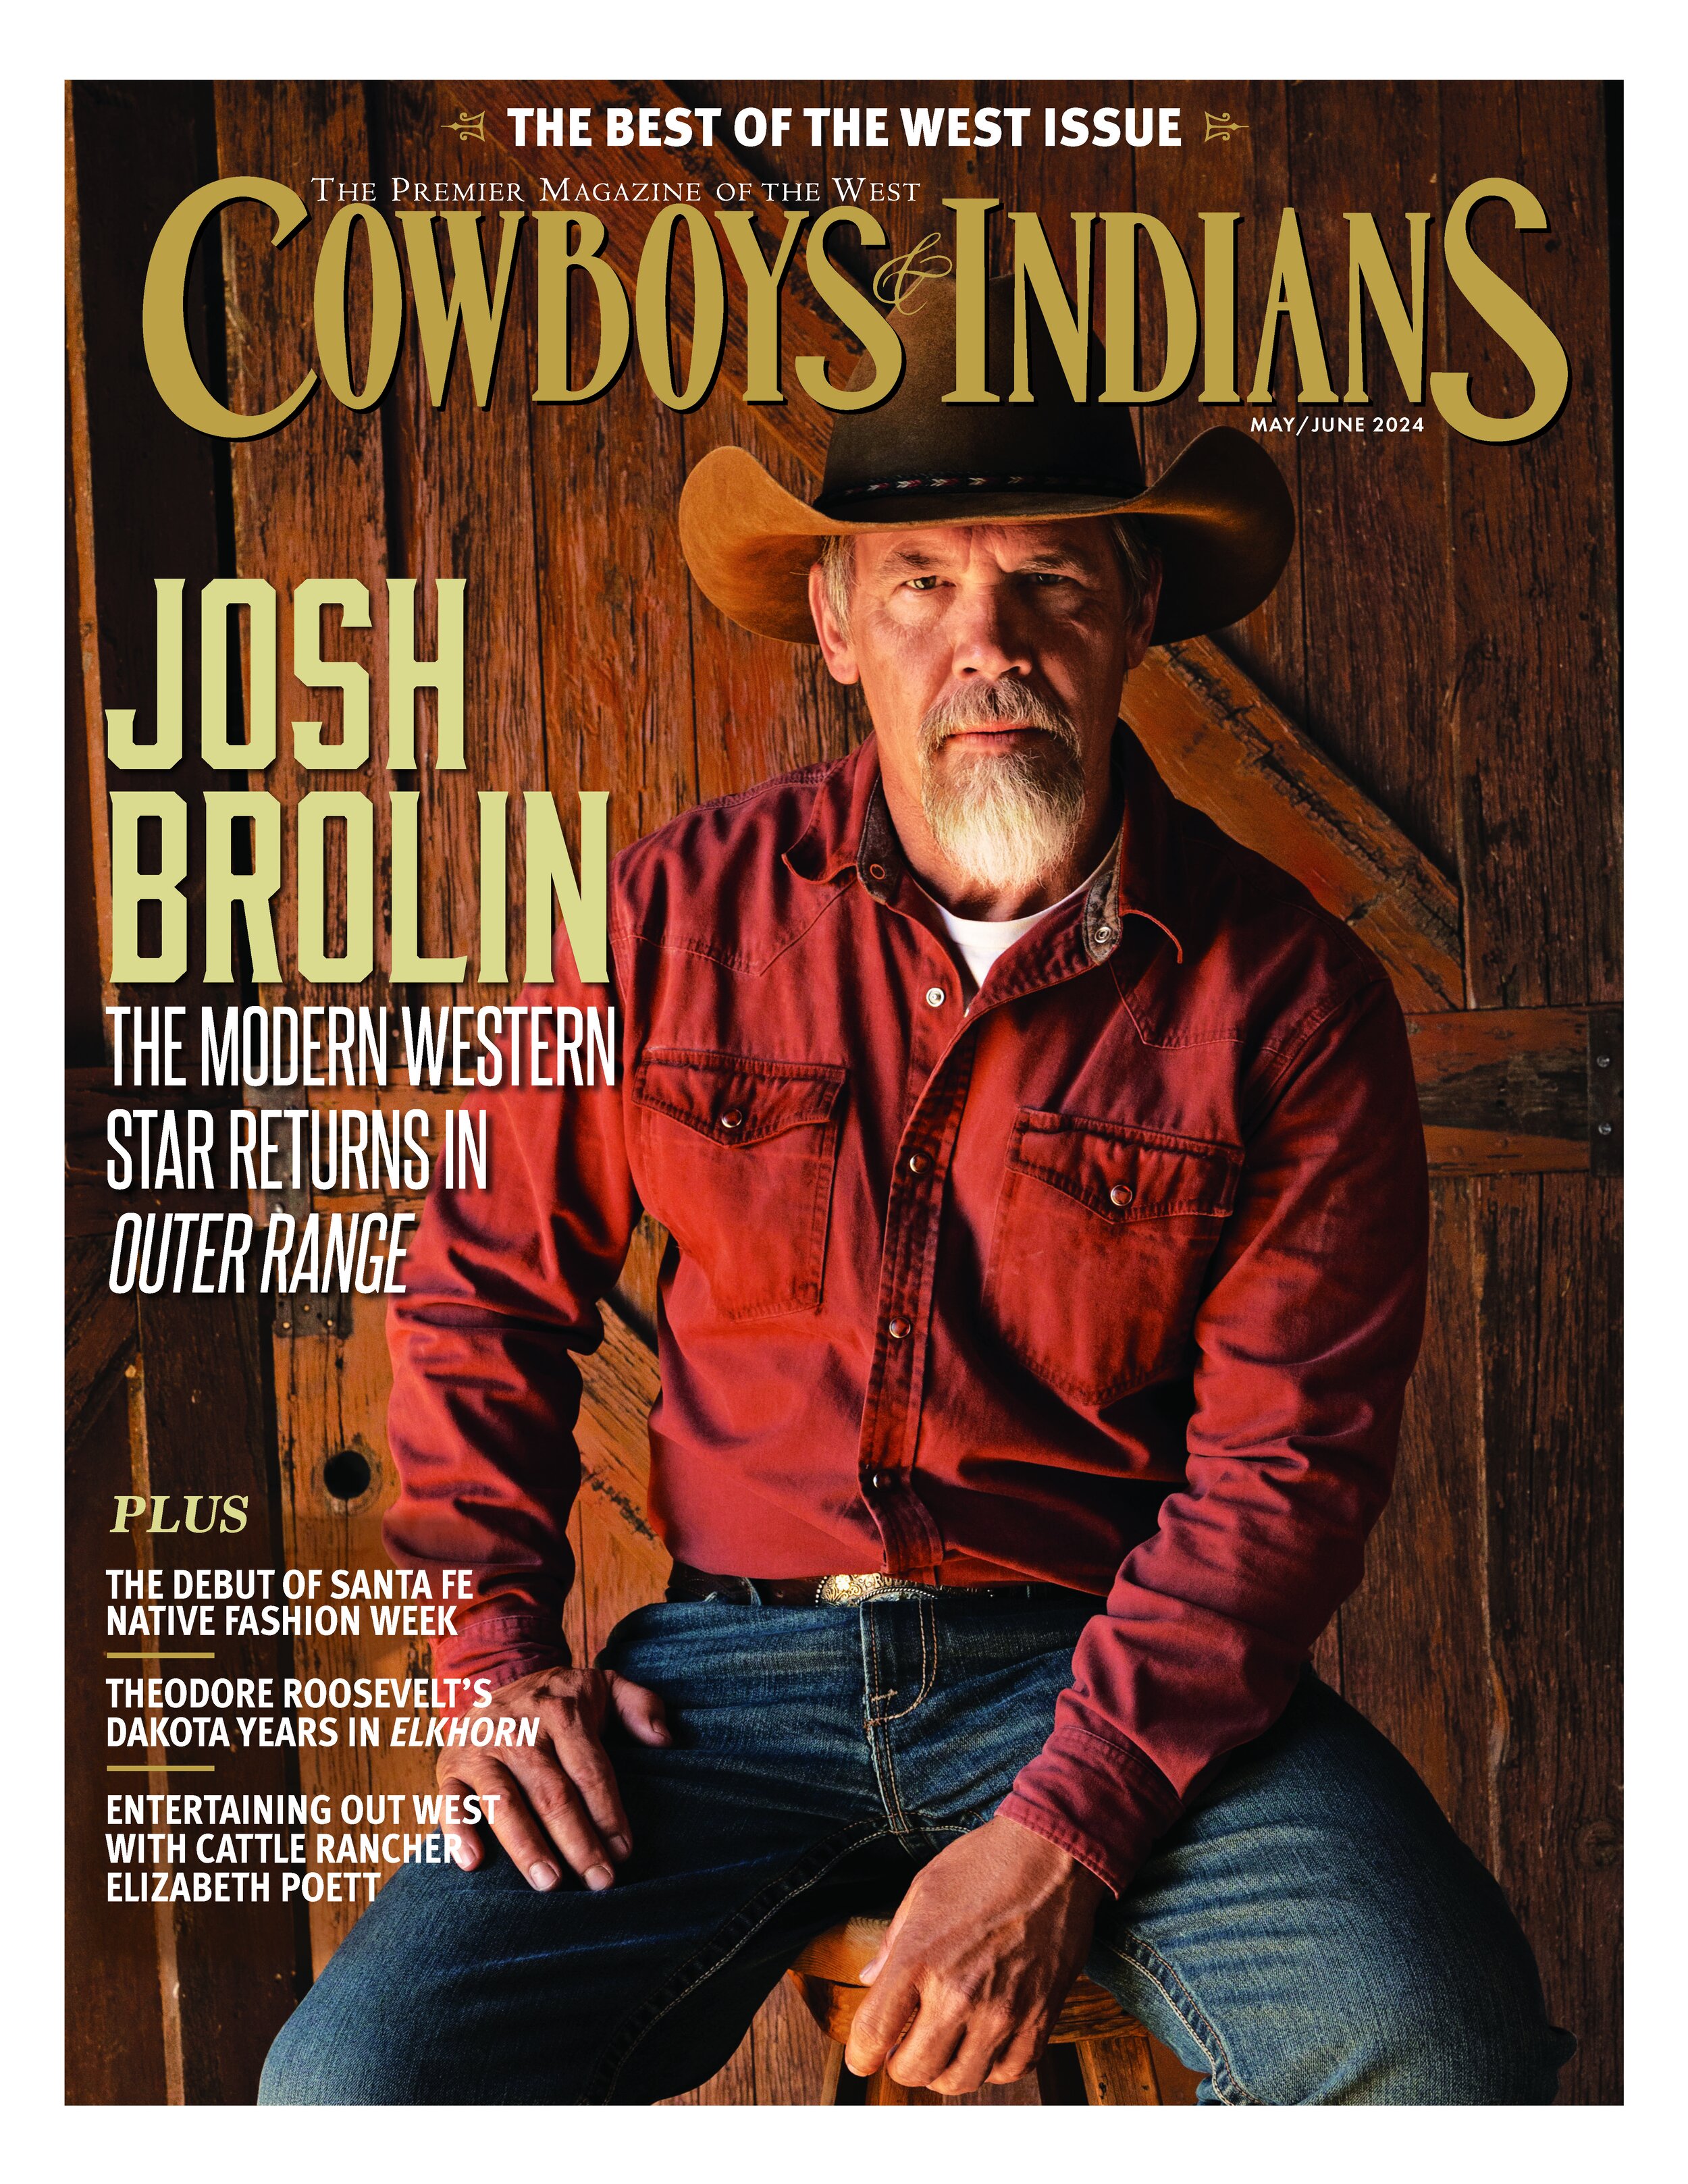 Cowboys and Indians Magazine -- GS Butteri Story -- May 2024_Page_1.jpg